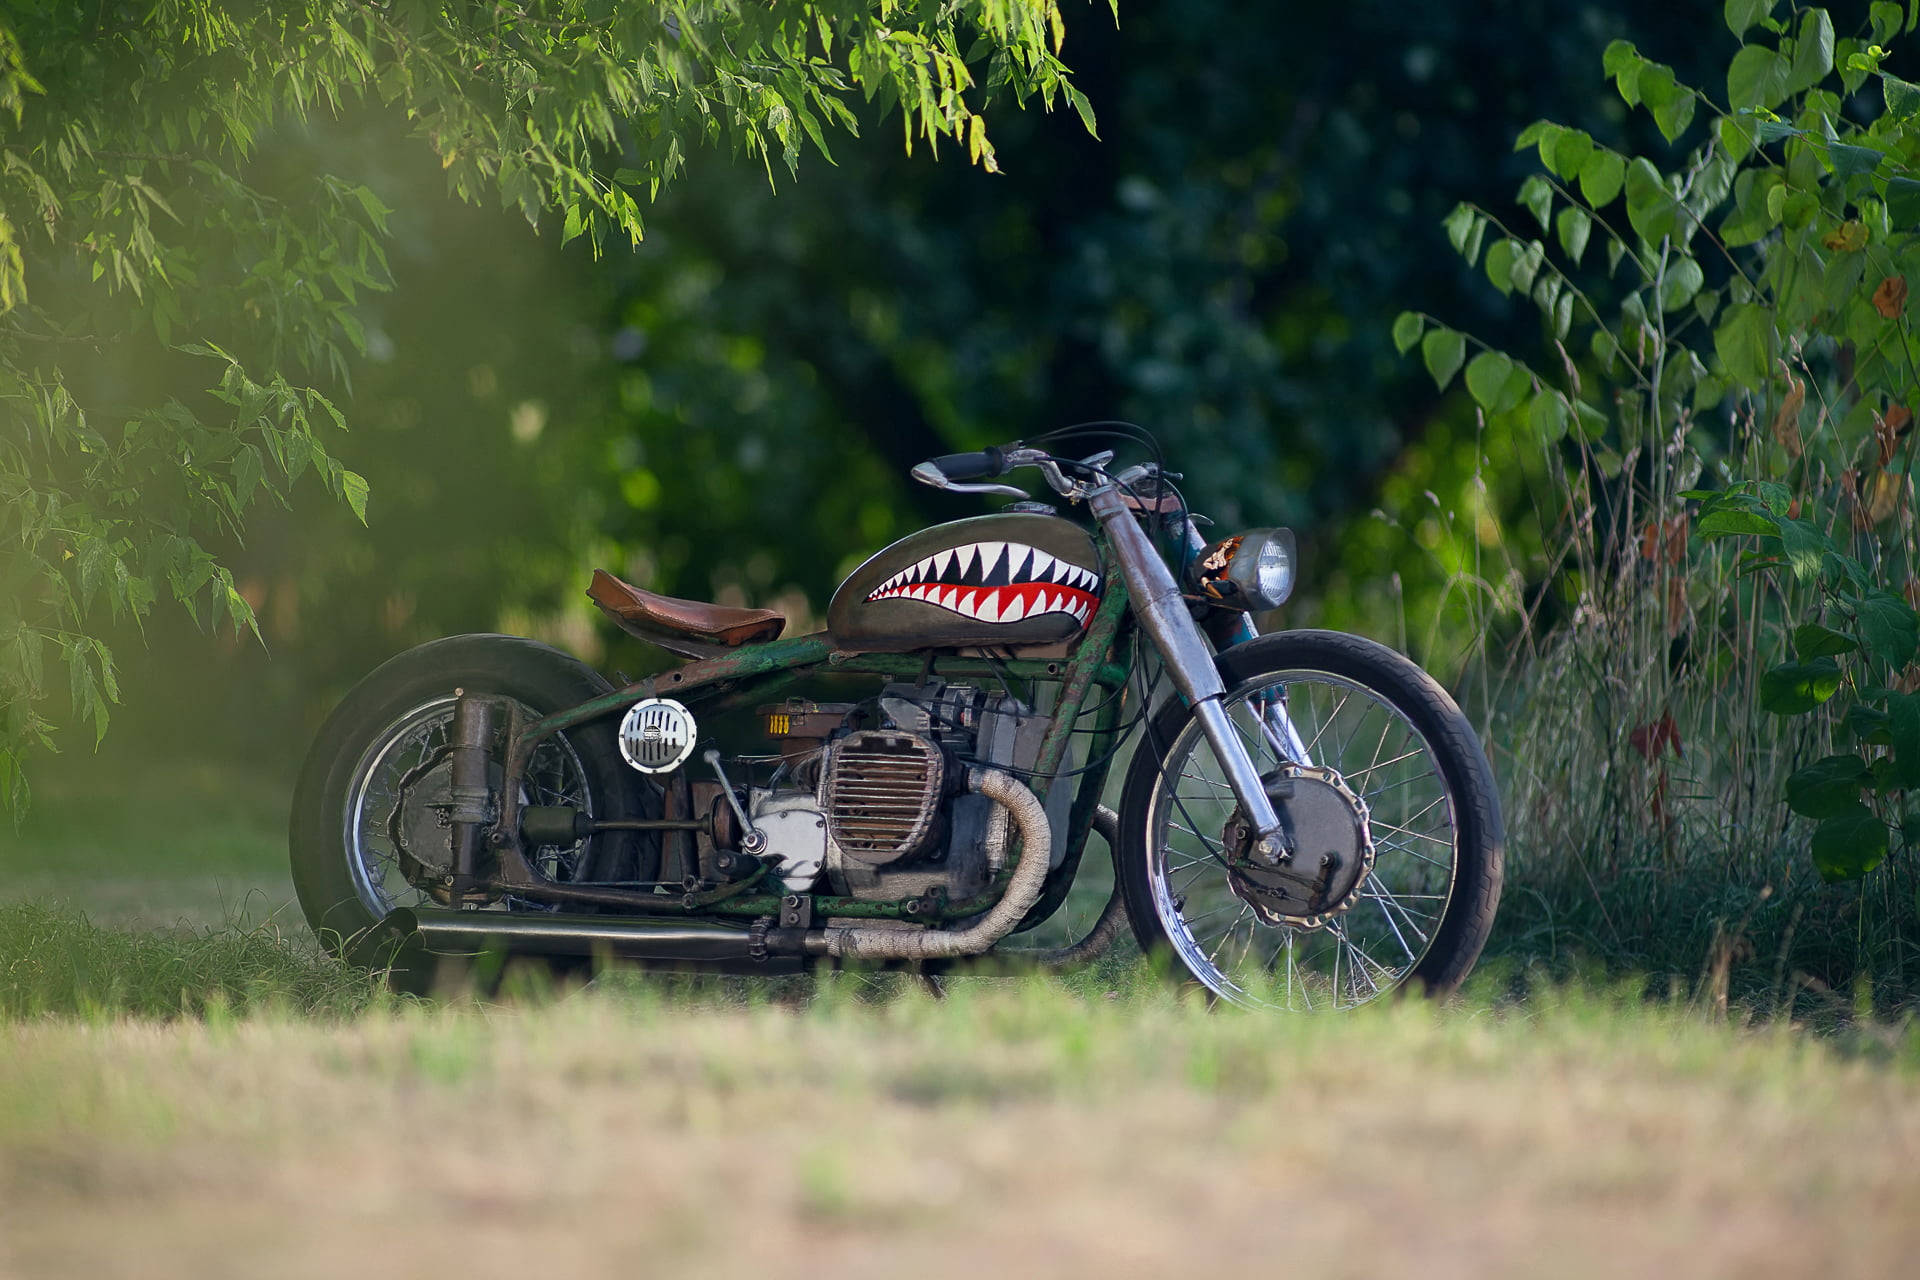 Shark Tooth Bobber Motorcycle Background